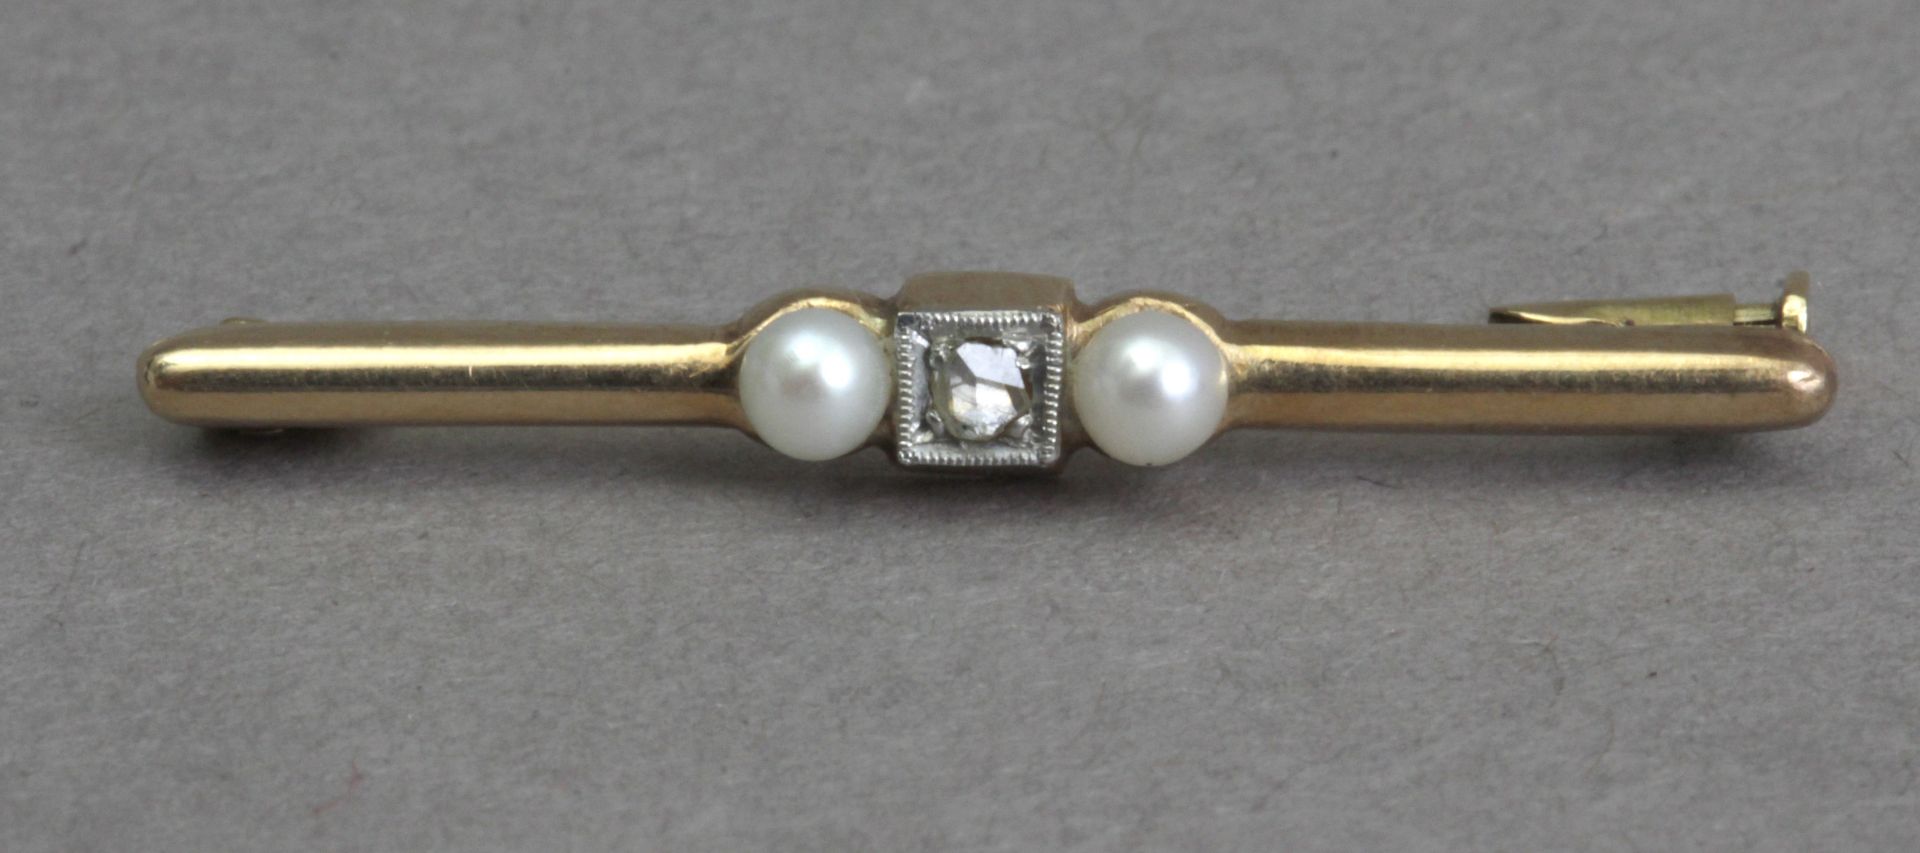 A first third of 20th century gold and diamonds tie pin - Image 2 of 4